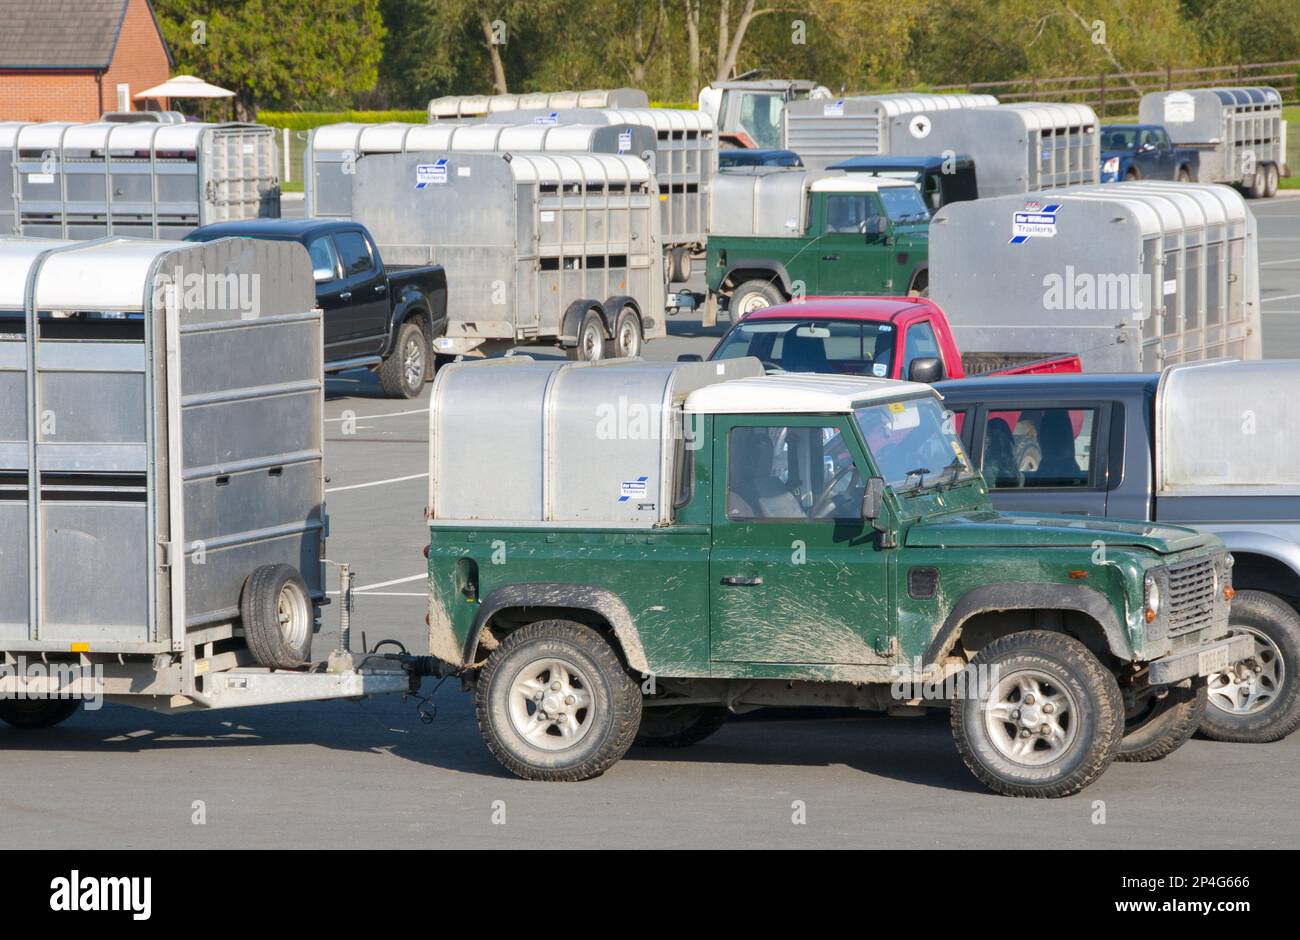 Land Rover and various other 4x4 vehicles and livestock trailers at livestock market, Welshpool Livestock Market, Powys, Wales, United Kingdom Stock Photo